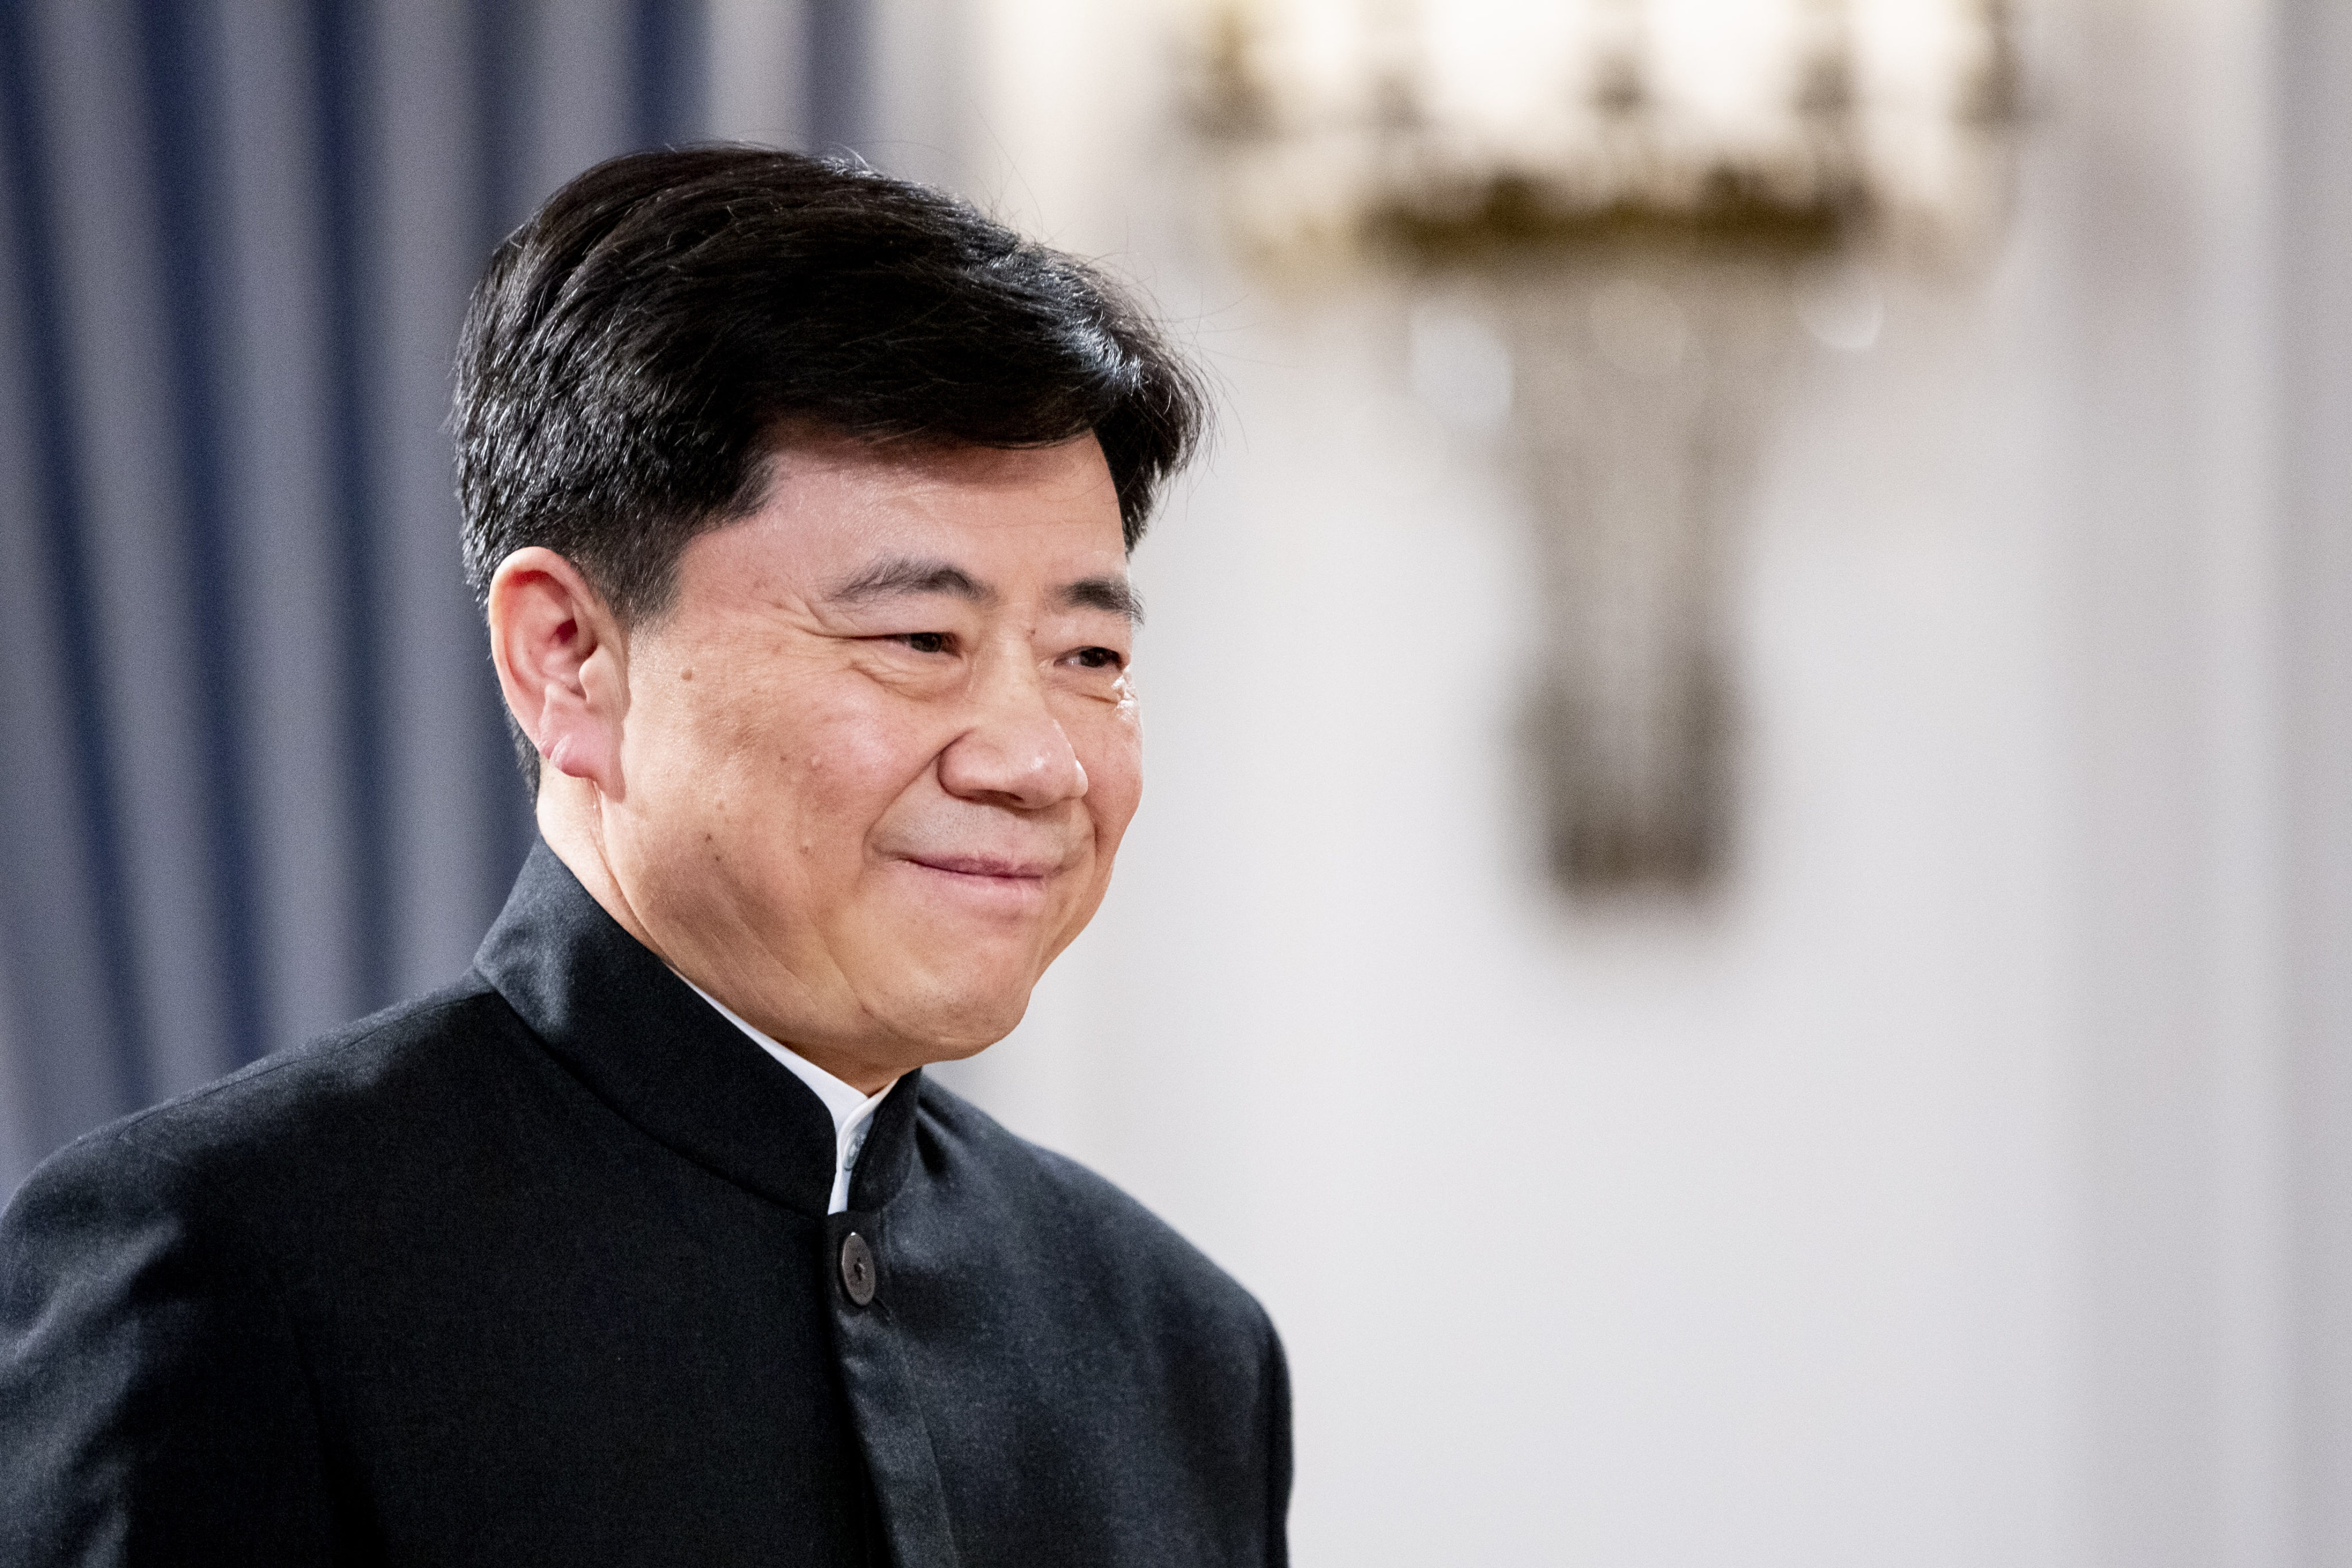 China’s ambassador to Germany, Wu Ken, says entrepreneurs in Europe have told him “China’s development is an opportunity rather than a challenge – giving up the Chinese market is tantamount to saying goodbye to opportunities and growth”. Photo: DPA